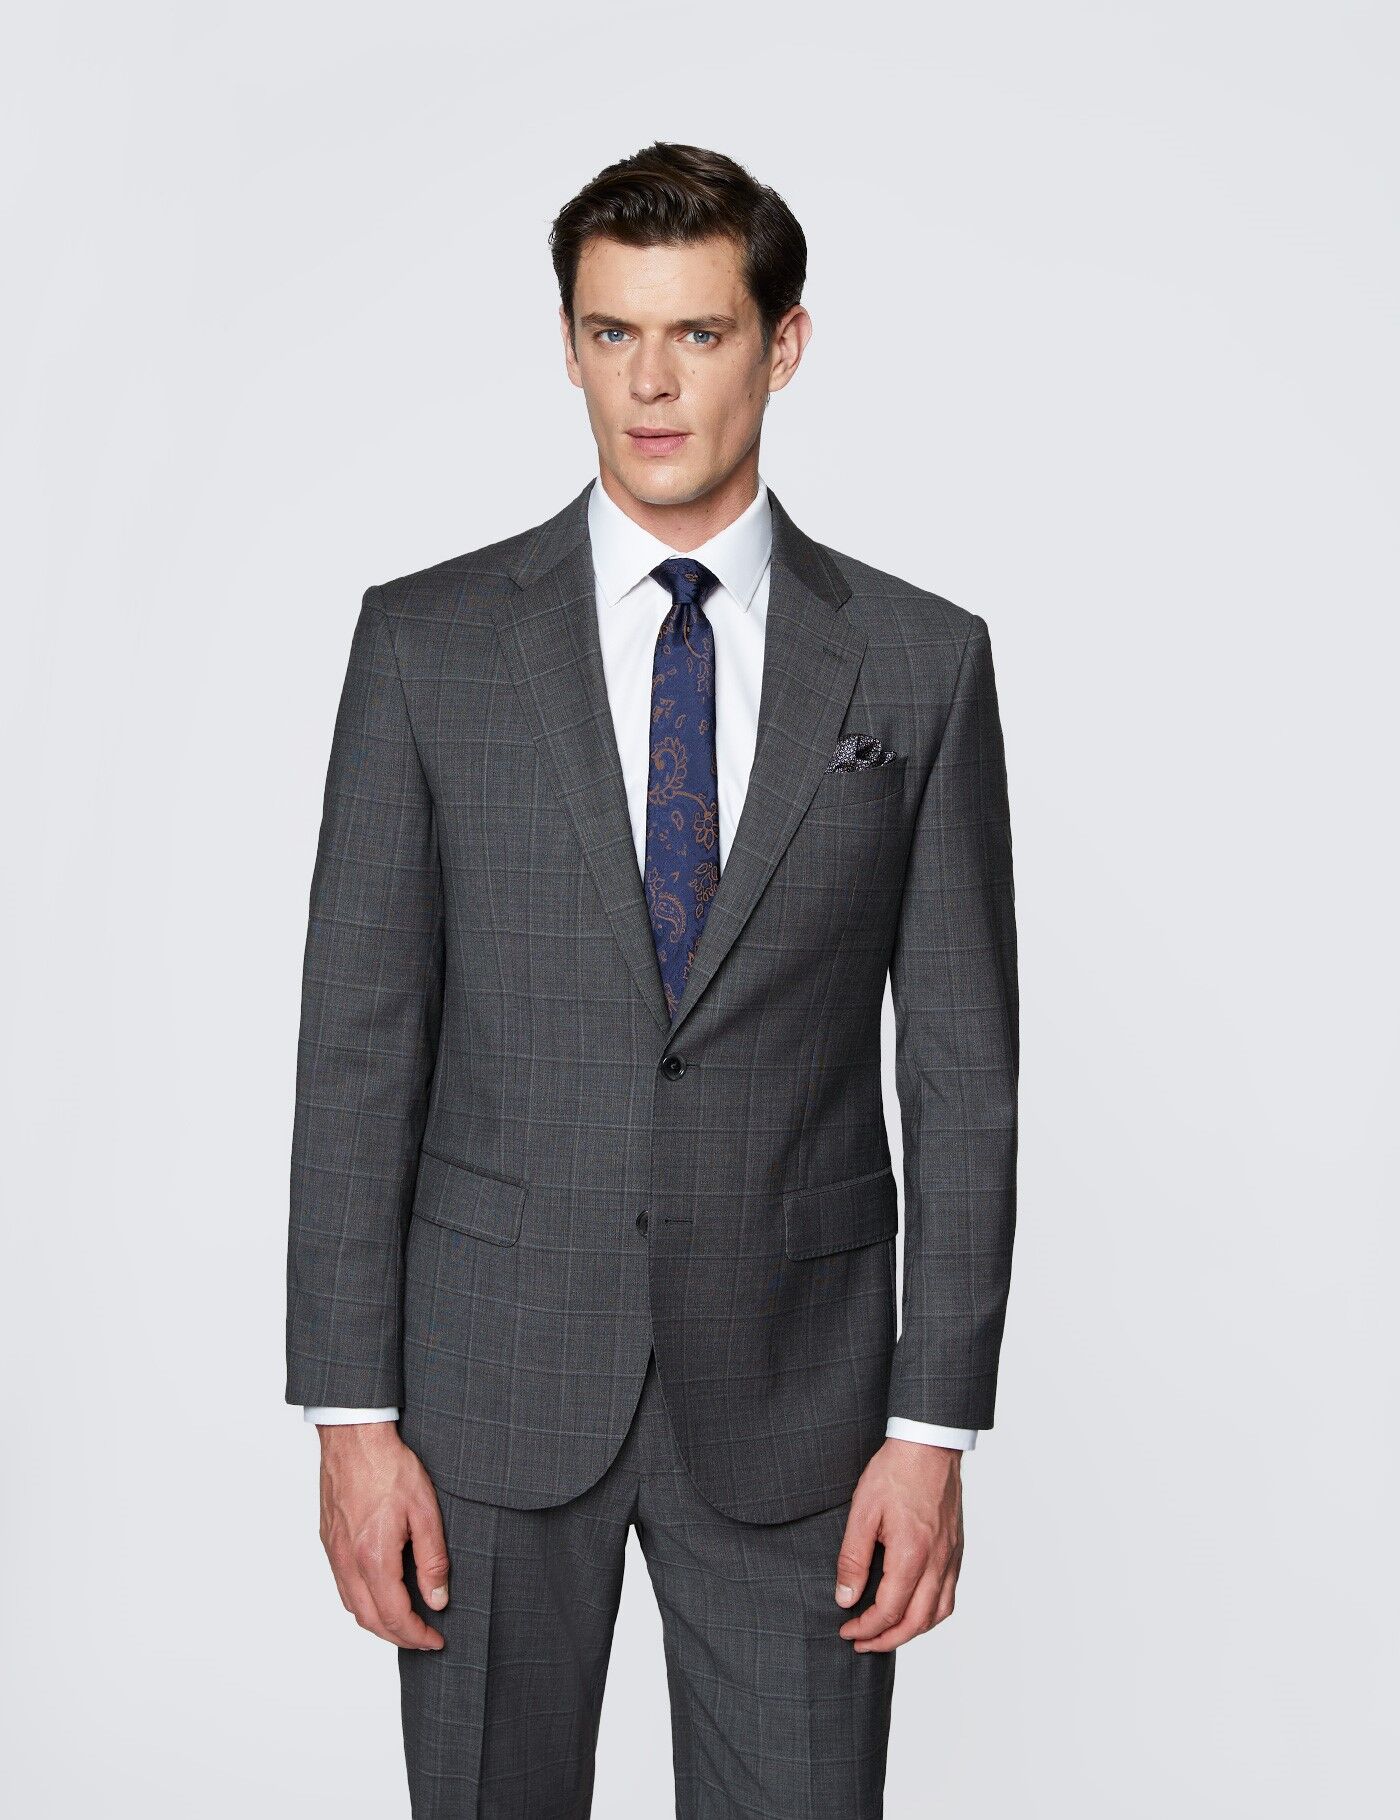 Hawes & Curtis Men's Tonal Check Tailored Fit Italian Suit Jacket in Dark Grey   36 Short   1913 Collection   Wool